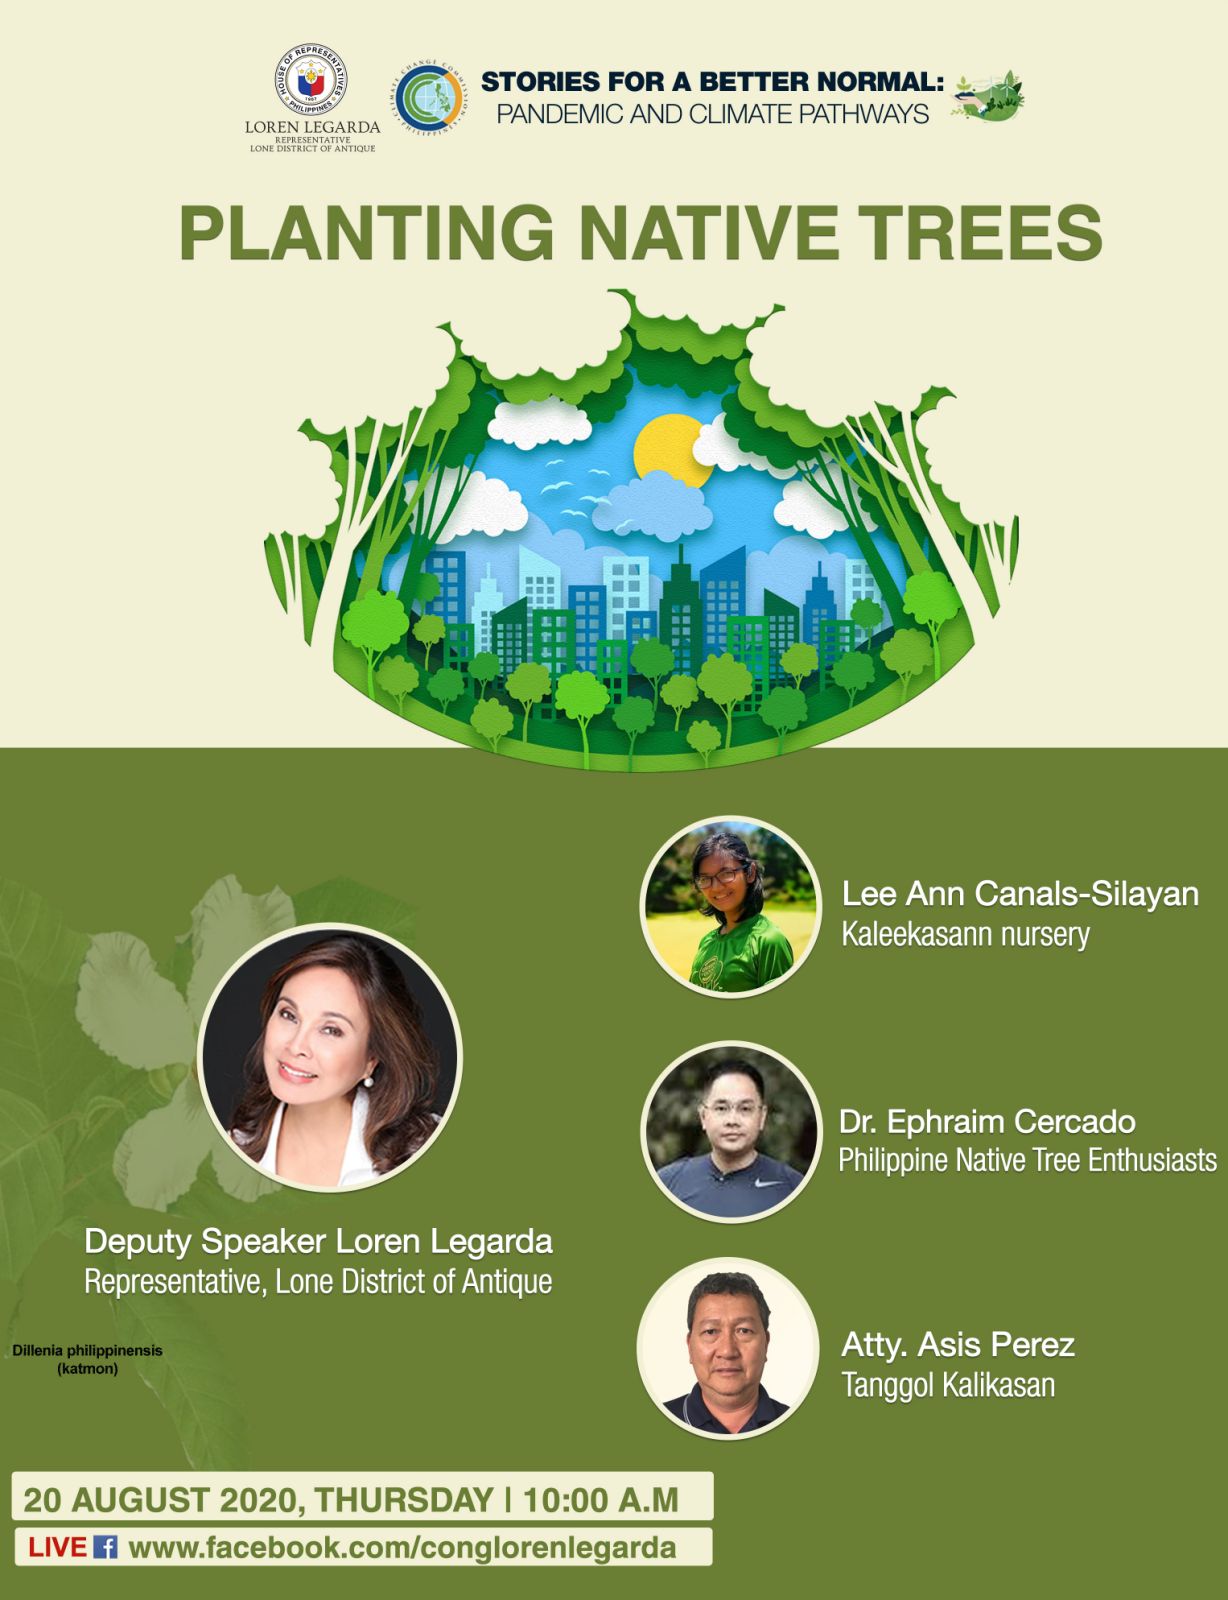 Planting Native Trees in 14th Episode of “Stories for a Better Normal” Series